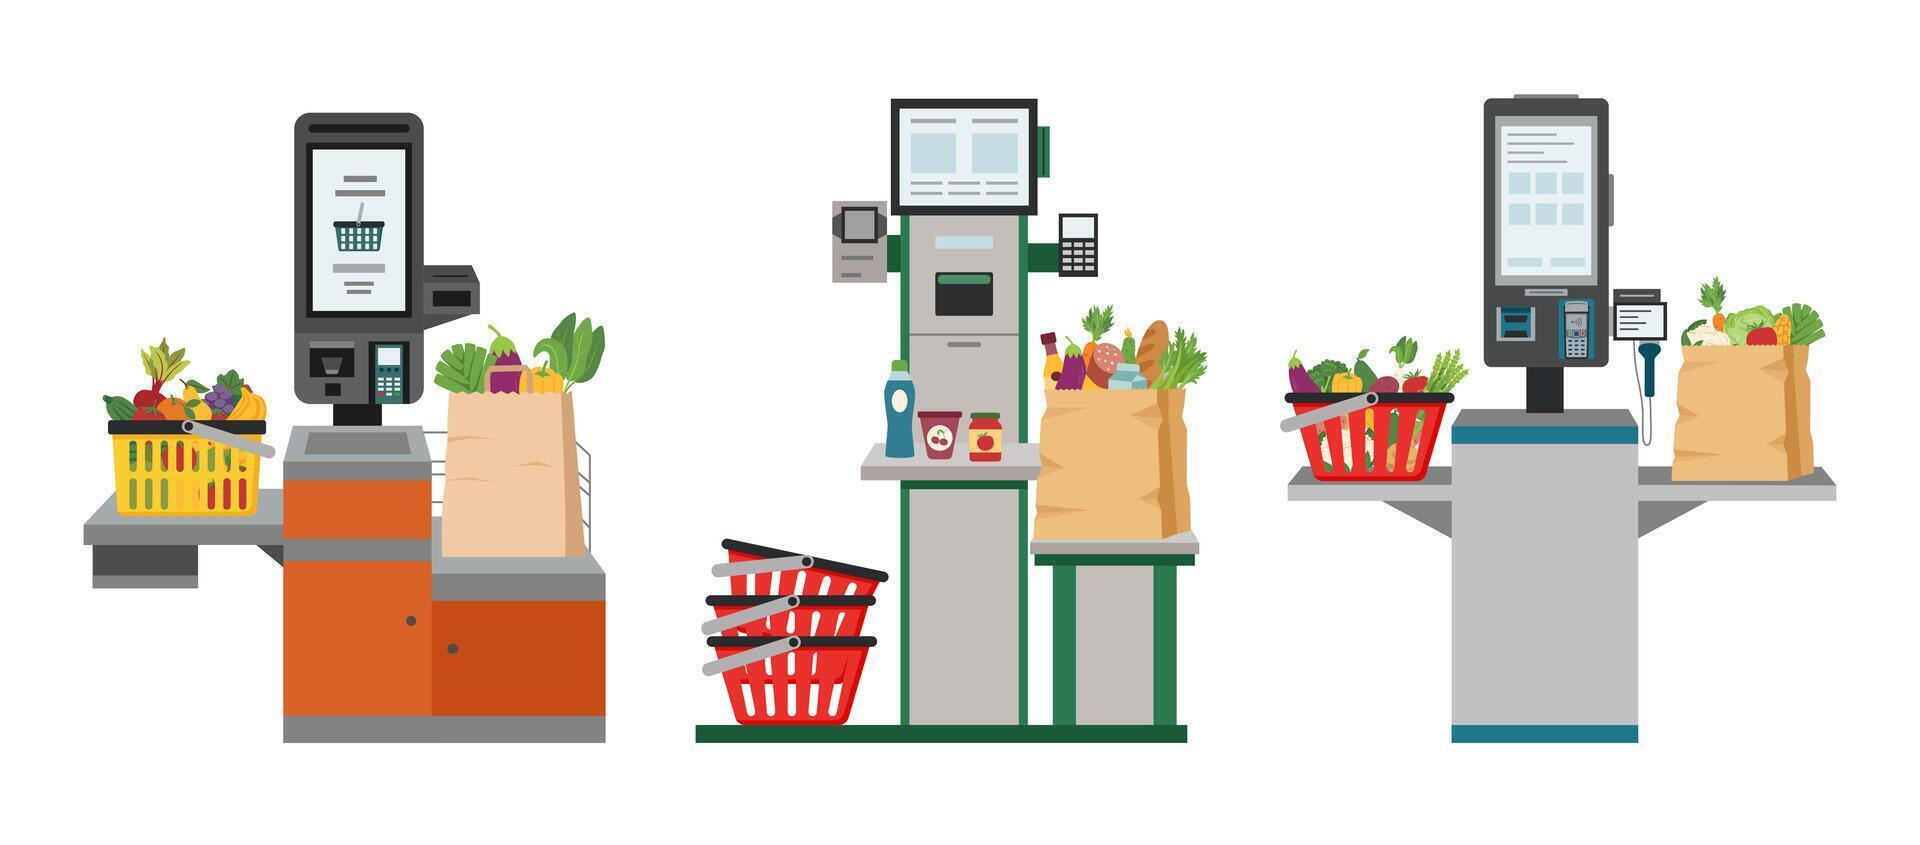 Set of self service checkouts with shopping bags full of food and shopping baskets in the supermarket isolated on white. Self service and self payment terminals. Contactless payment. vector